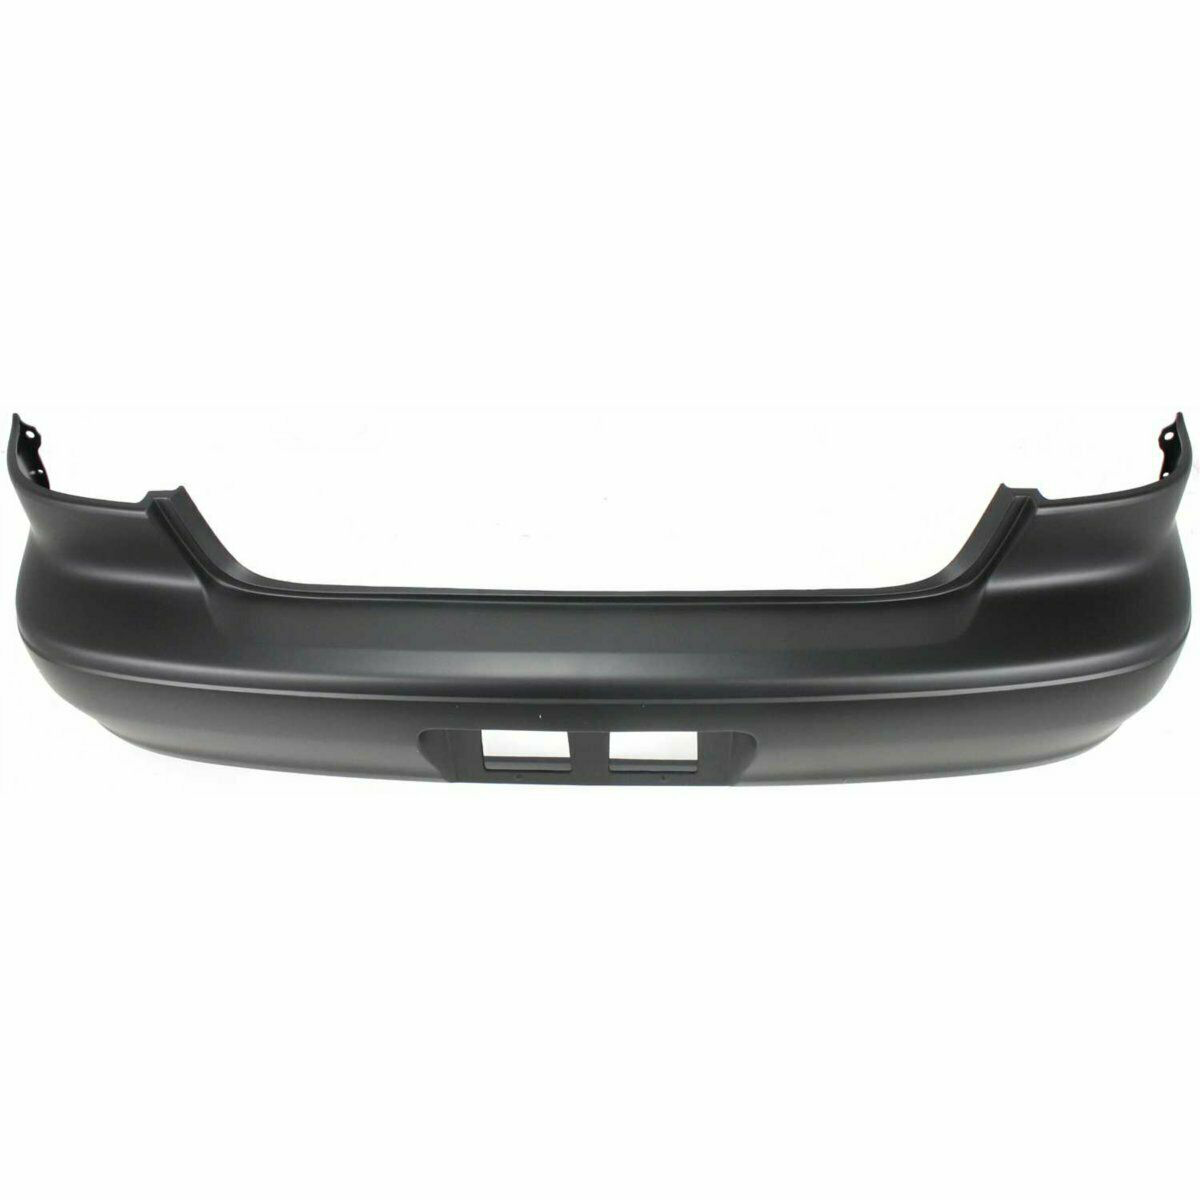 1998-2002 Toyota Corolla Rear Bumper Painted to Match